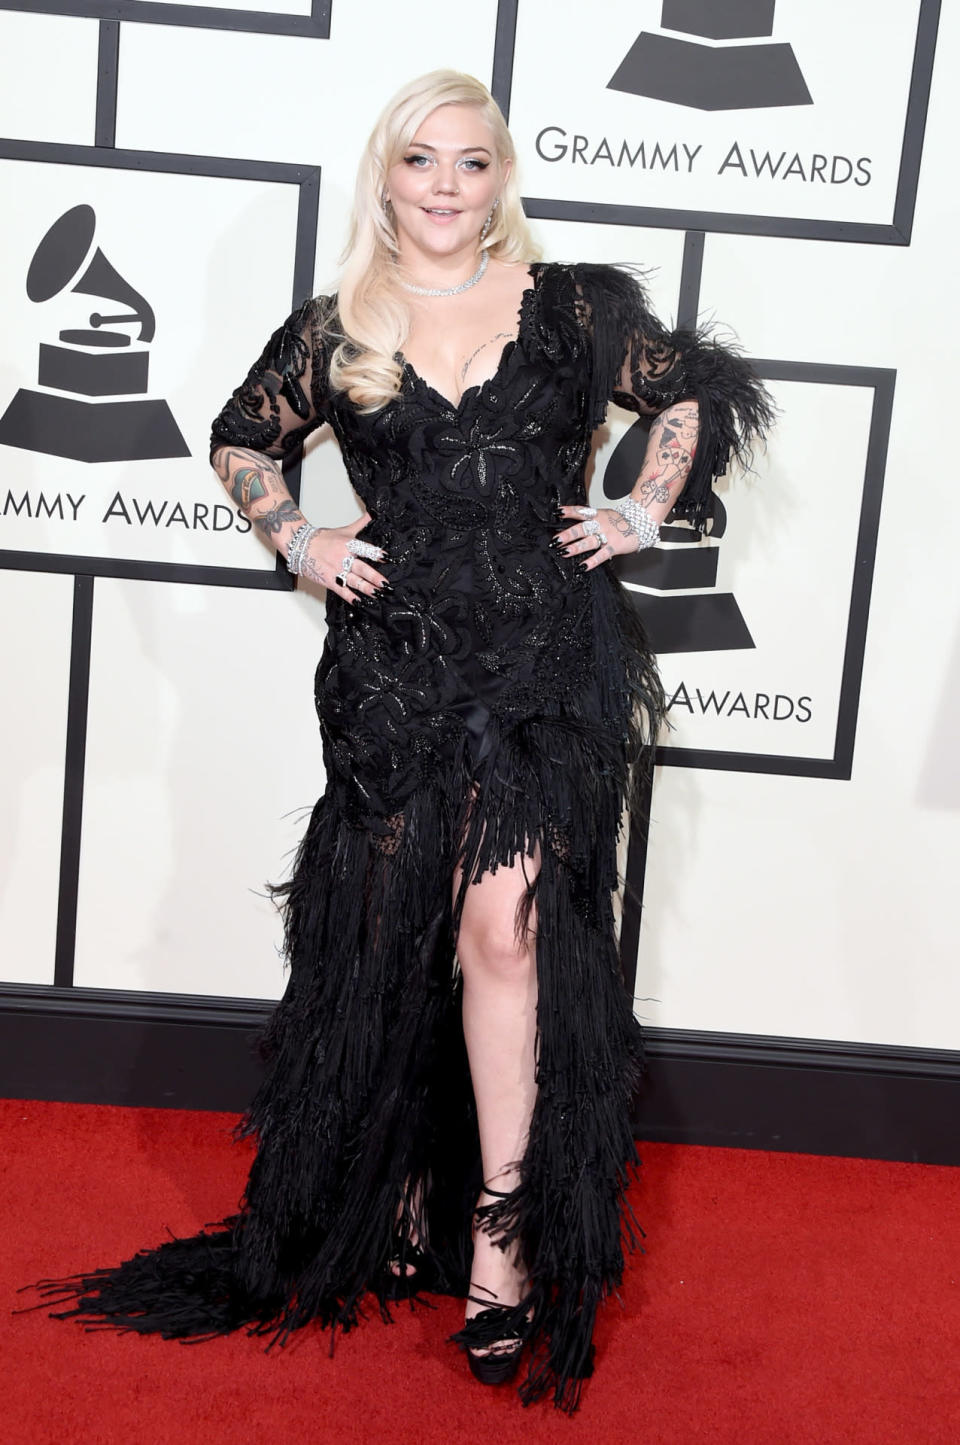 Worst: Ellie King in a black feathery dress at the 58th Grammy Awards at Staples Center in Los Angeles, California, on February 15, 2016. 